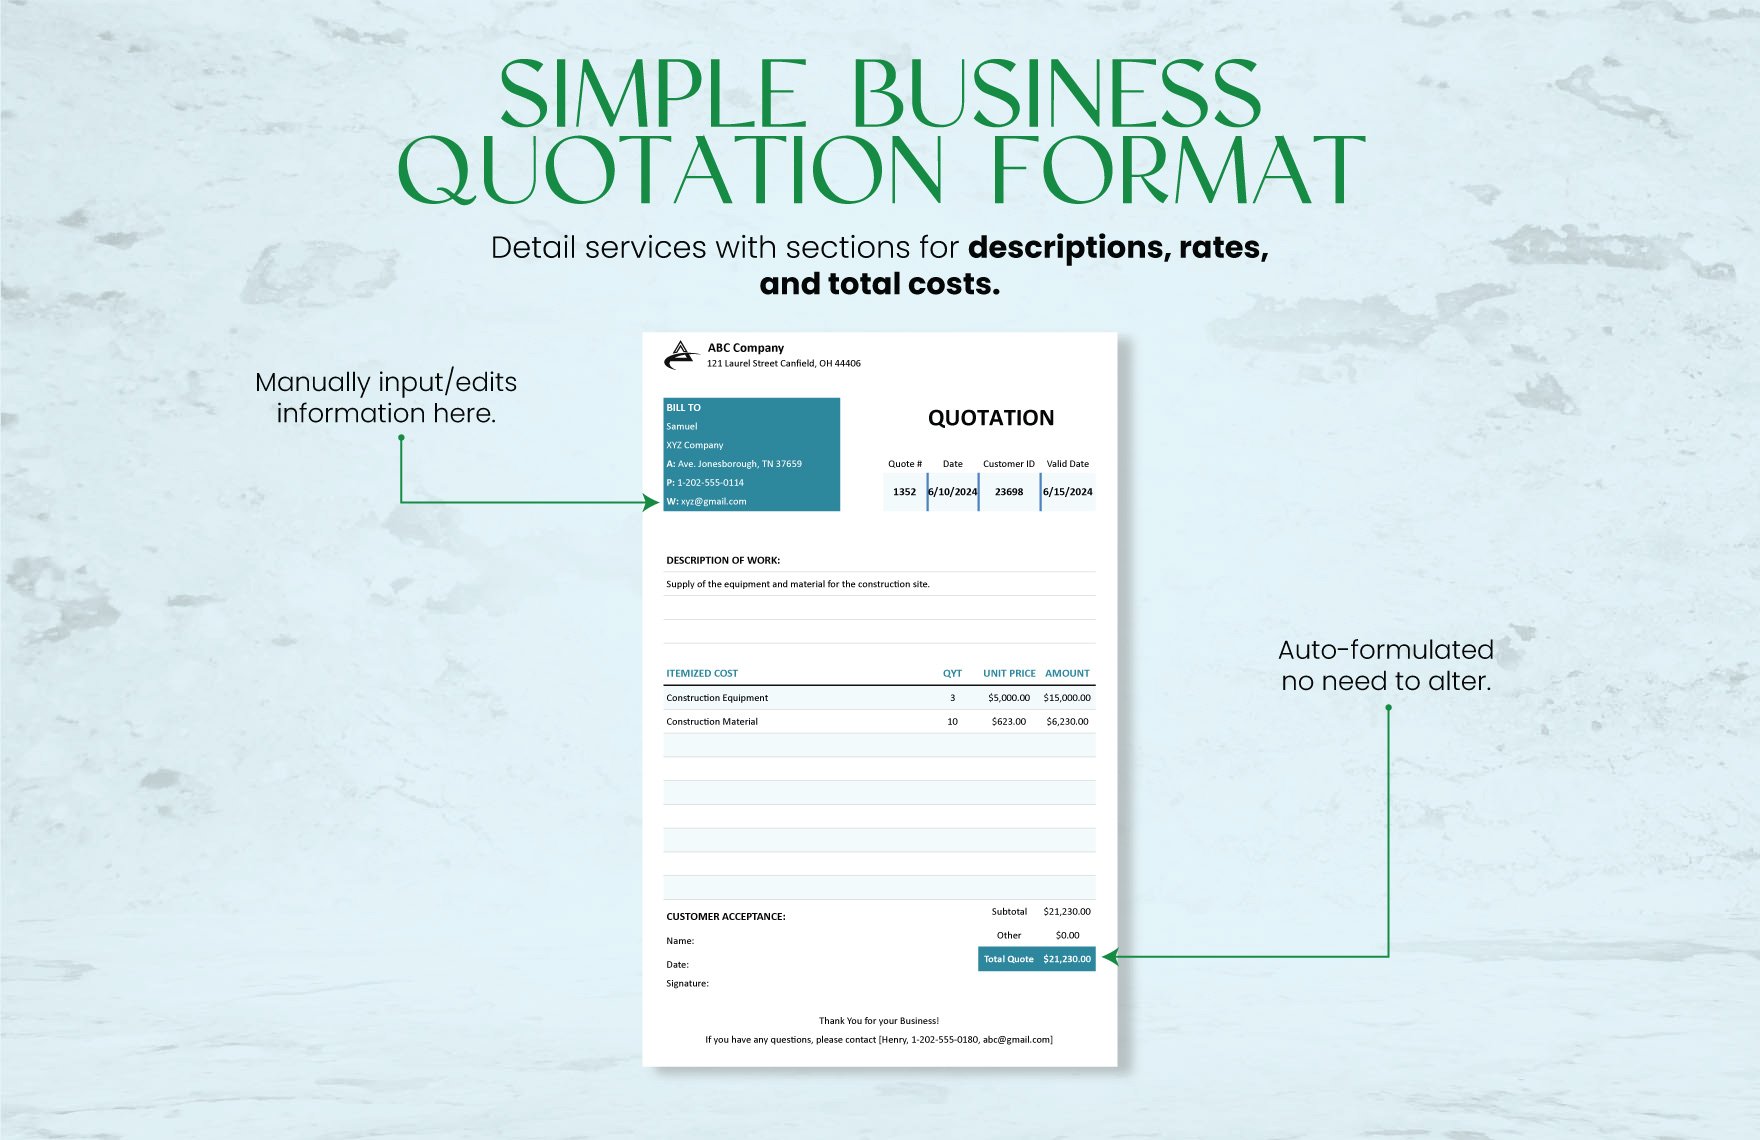 Simple Business Quotation Format Template